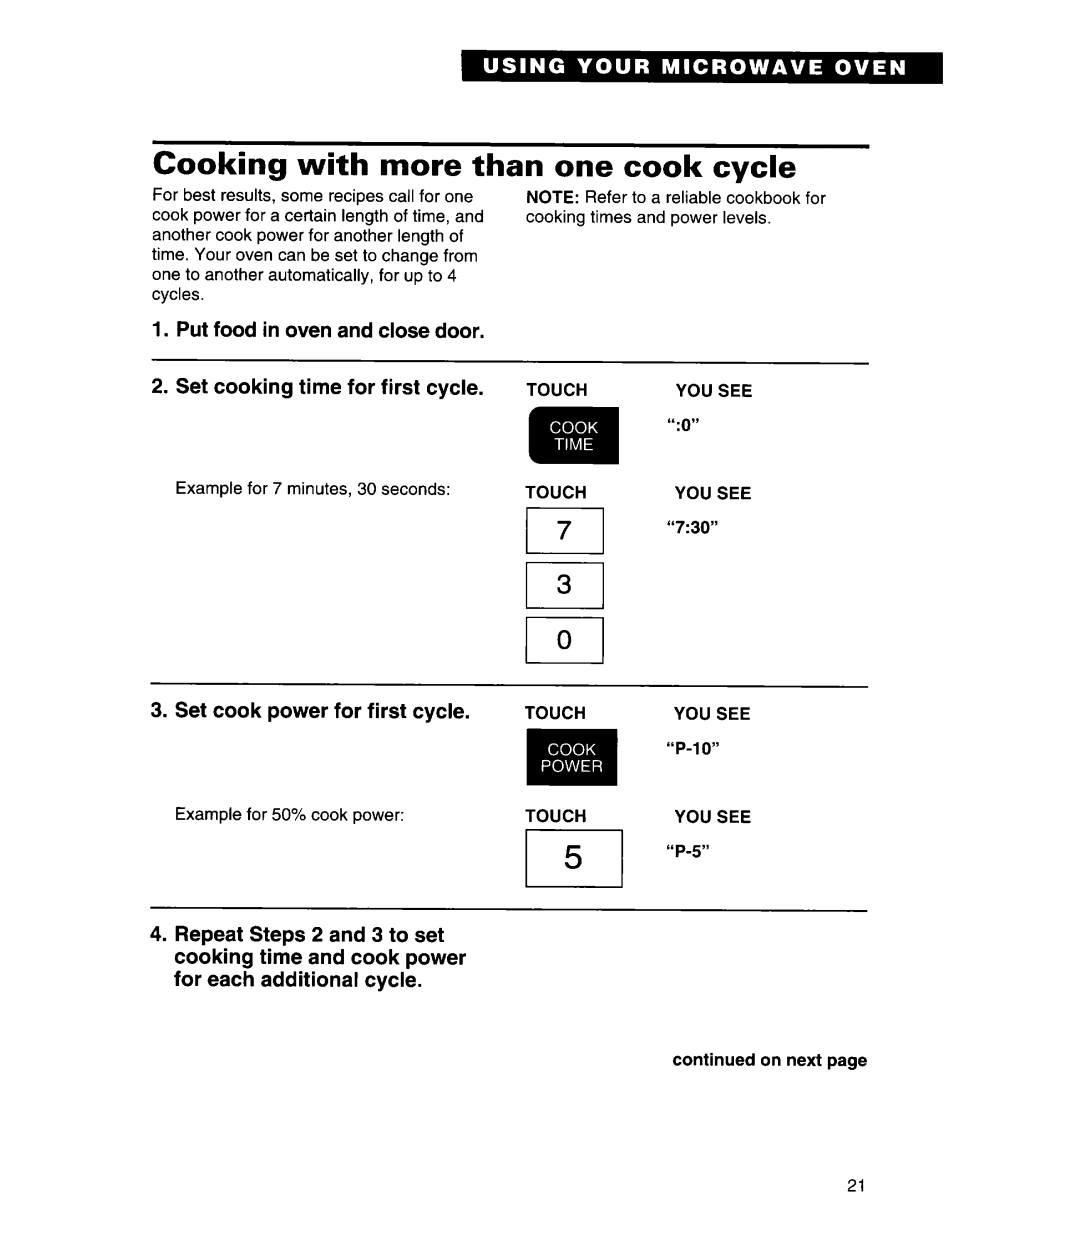 Whirlpool MT7078XD Cooking with more than one cook cycle, Set cooking time for first cycle, Set cook power for first cycle 